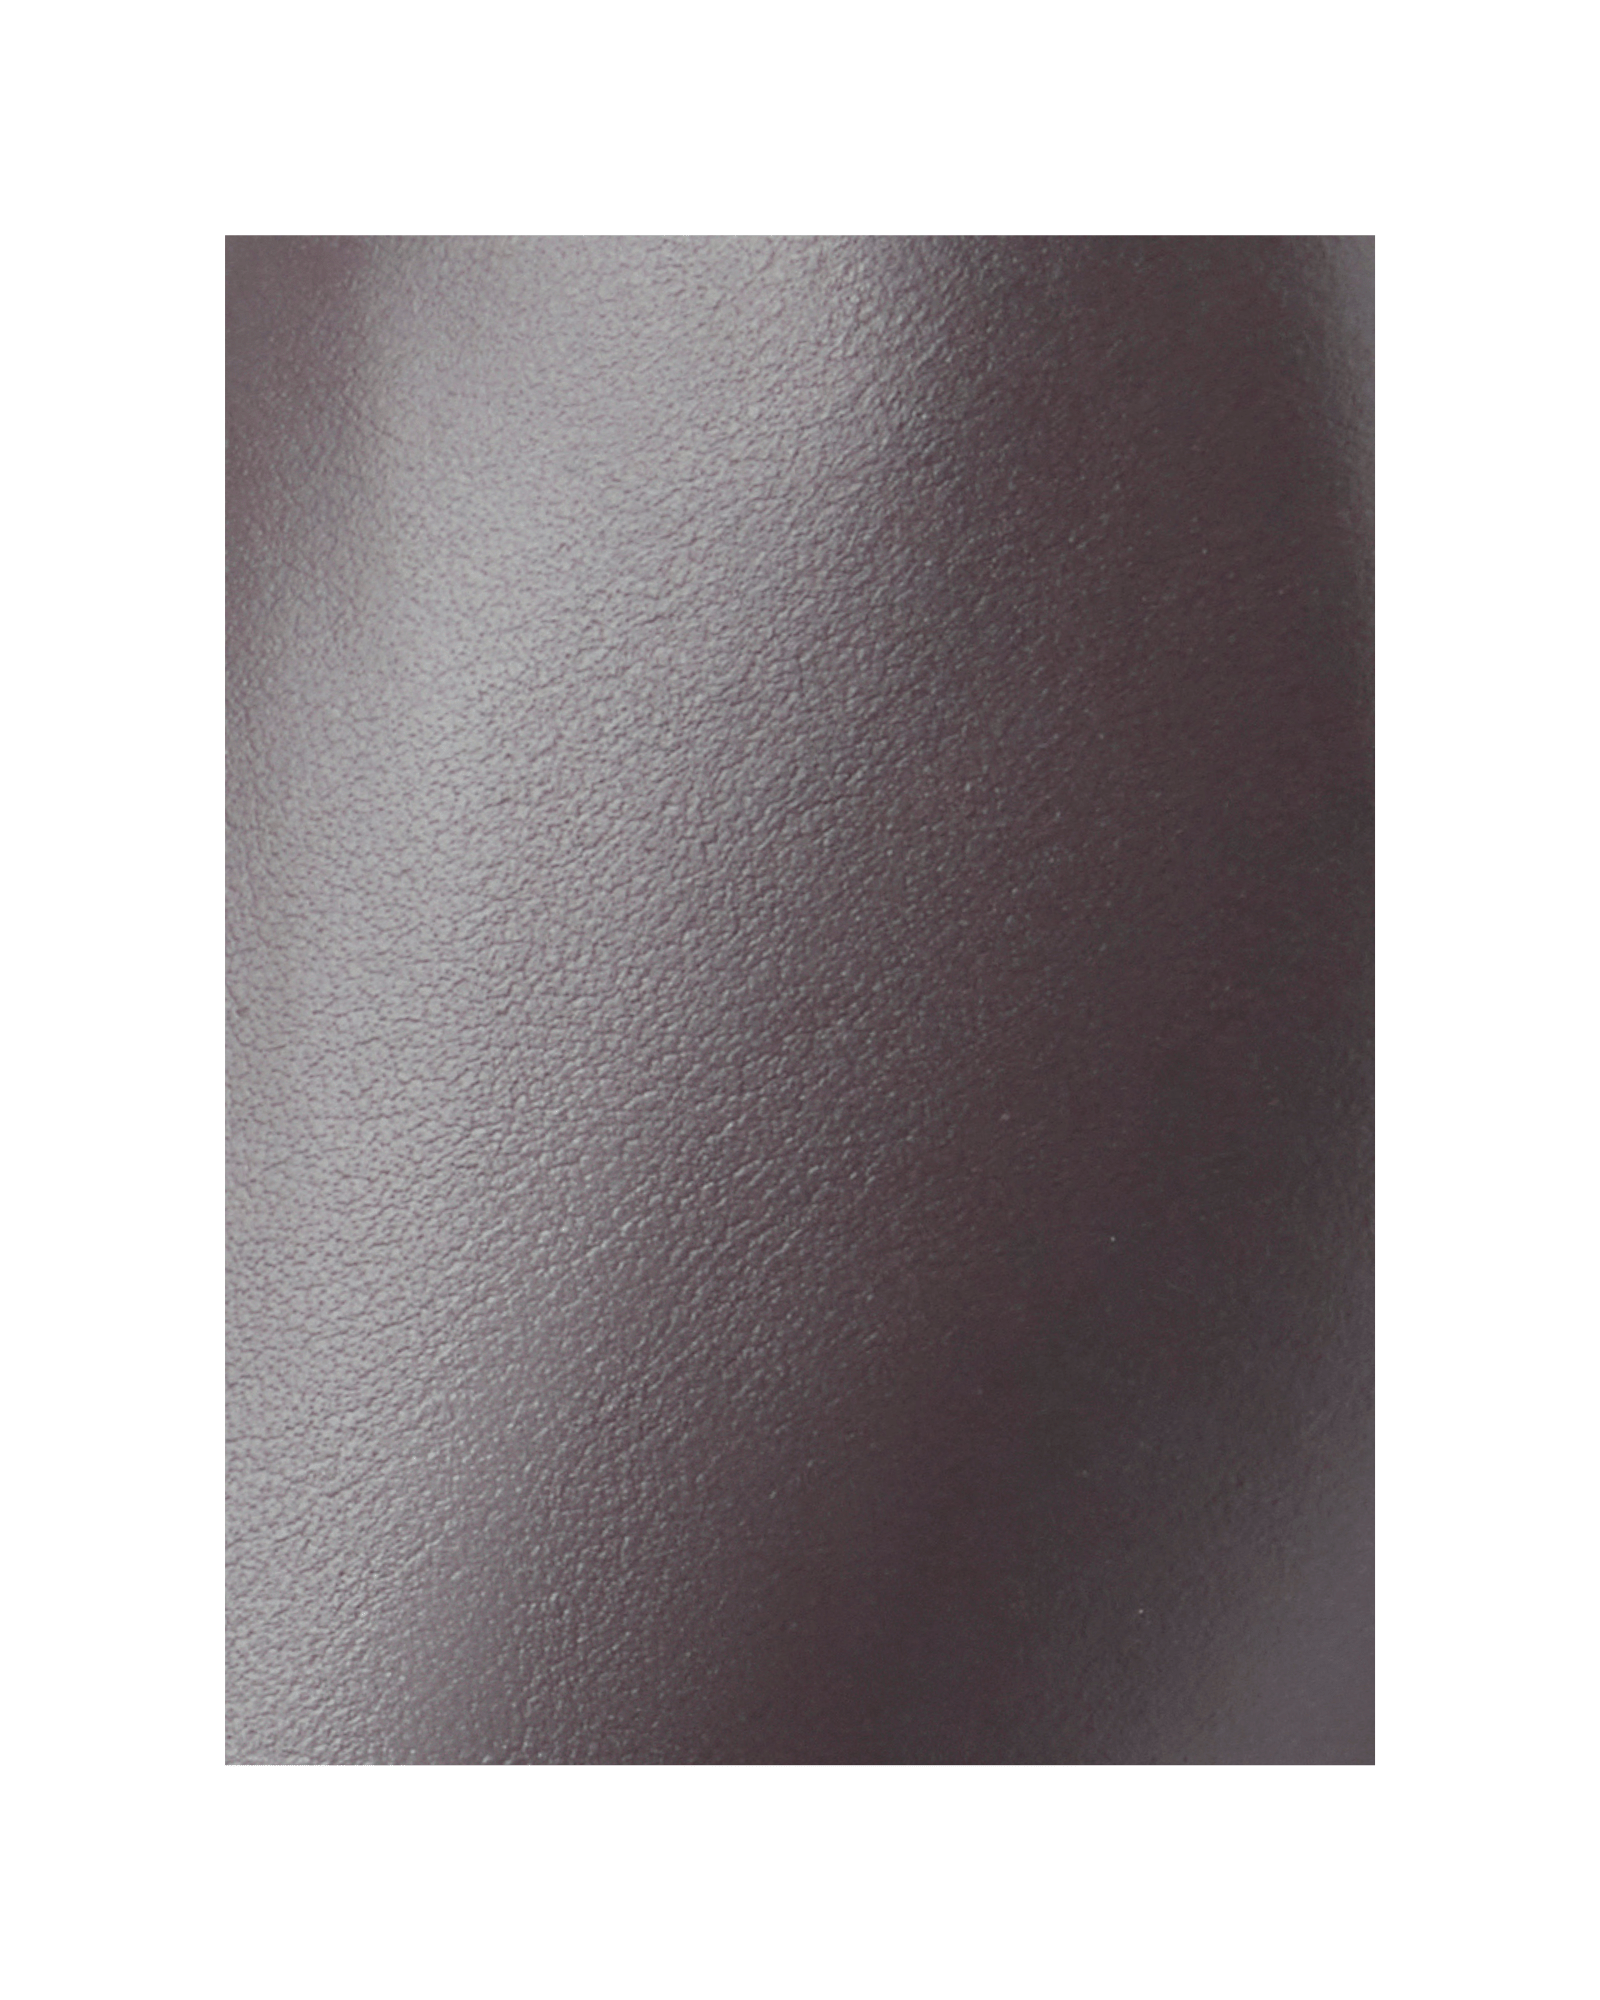 Mole Grey Leather Colour Swatches Emmy London  image